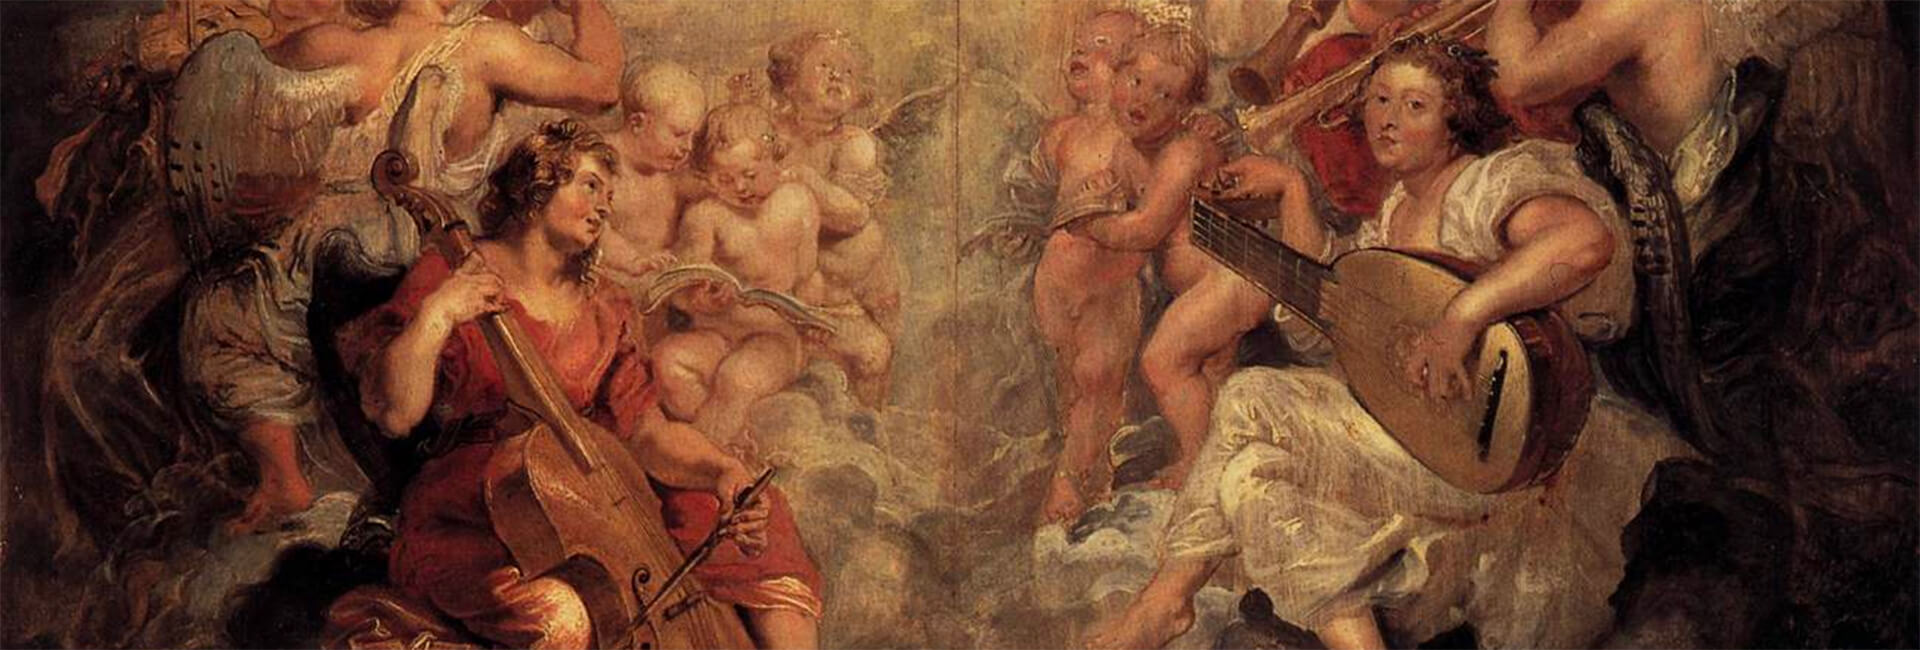 Music Making Angels - Painting by Peter Paul Rubens